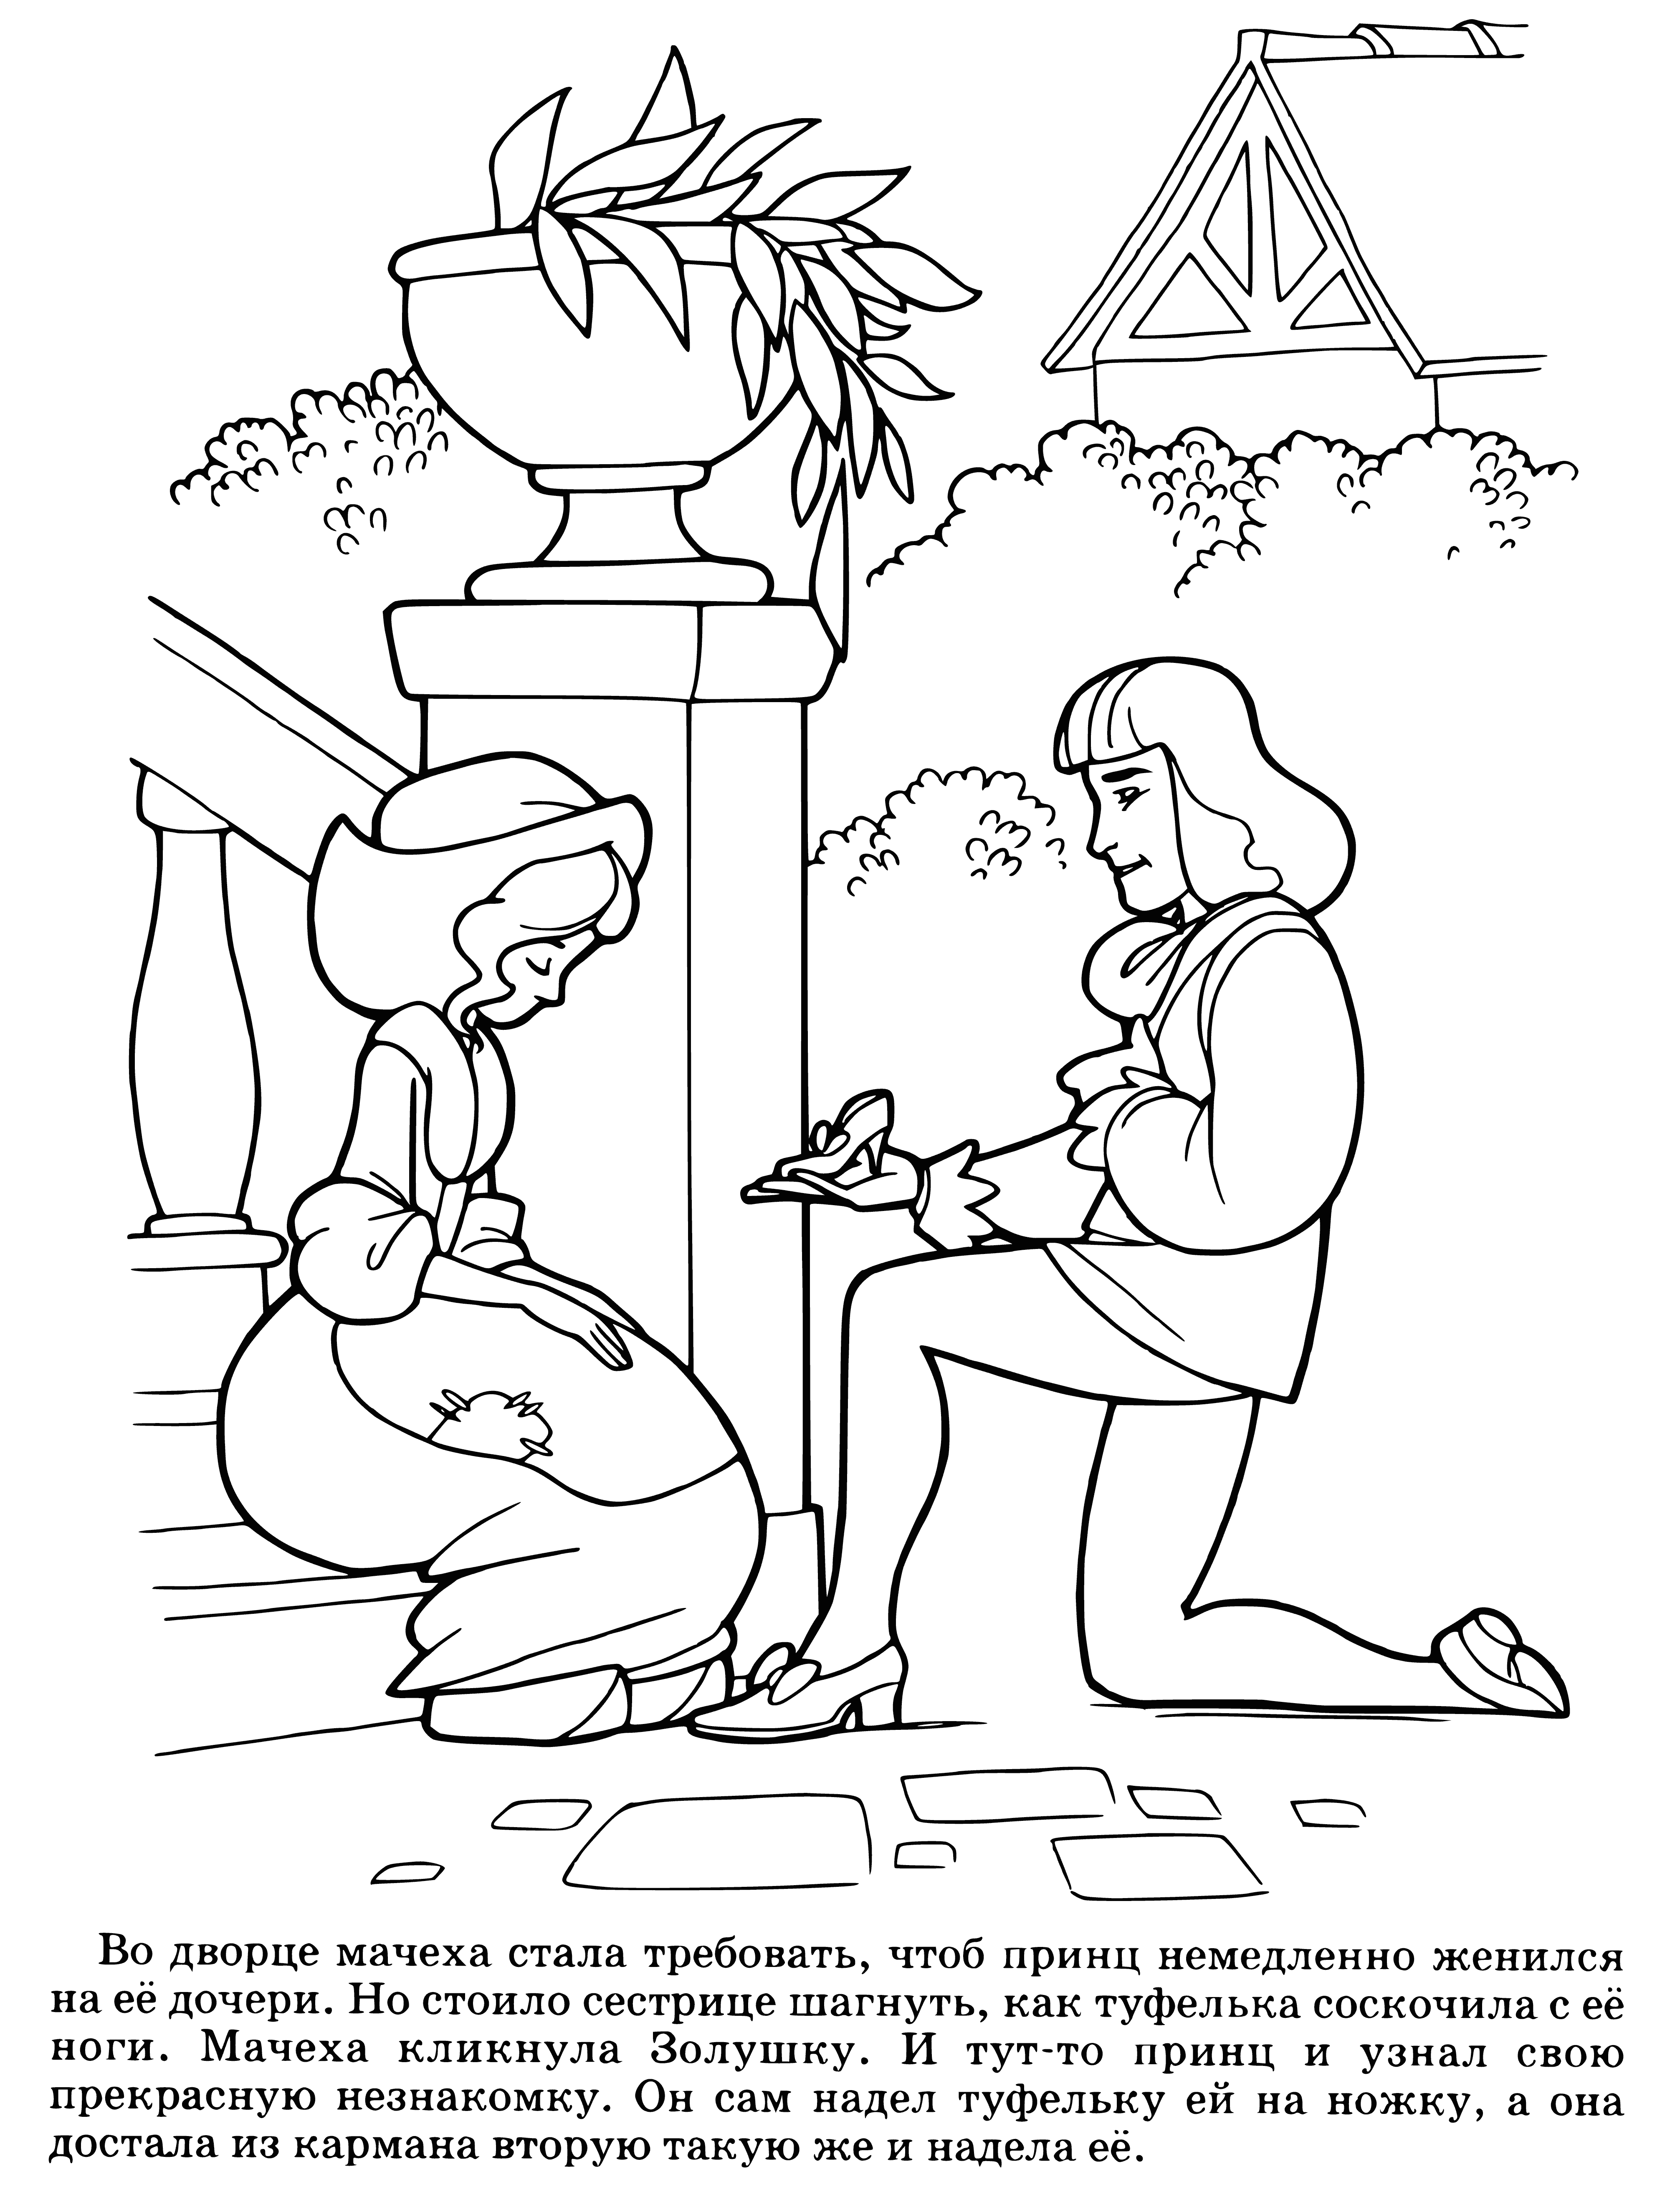 coloring page: Two mice flanking a glass slipper on rose bed; one with spindle, the other with a needle. A perfect fairytale scene!